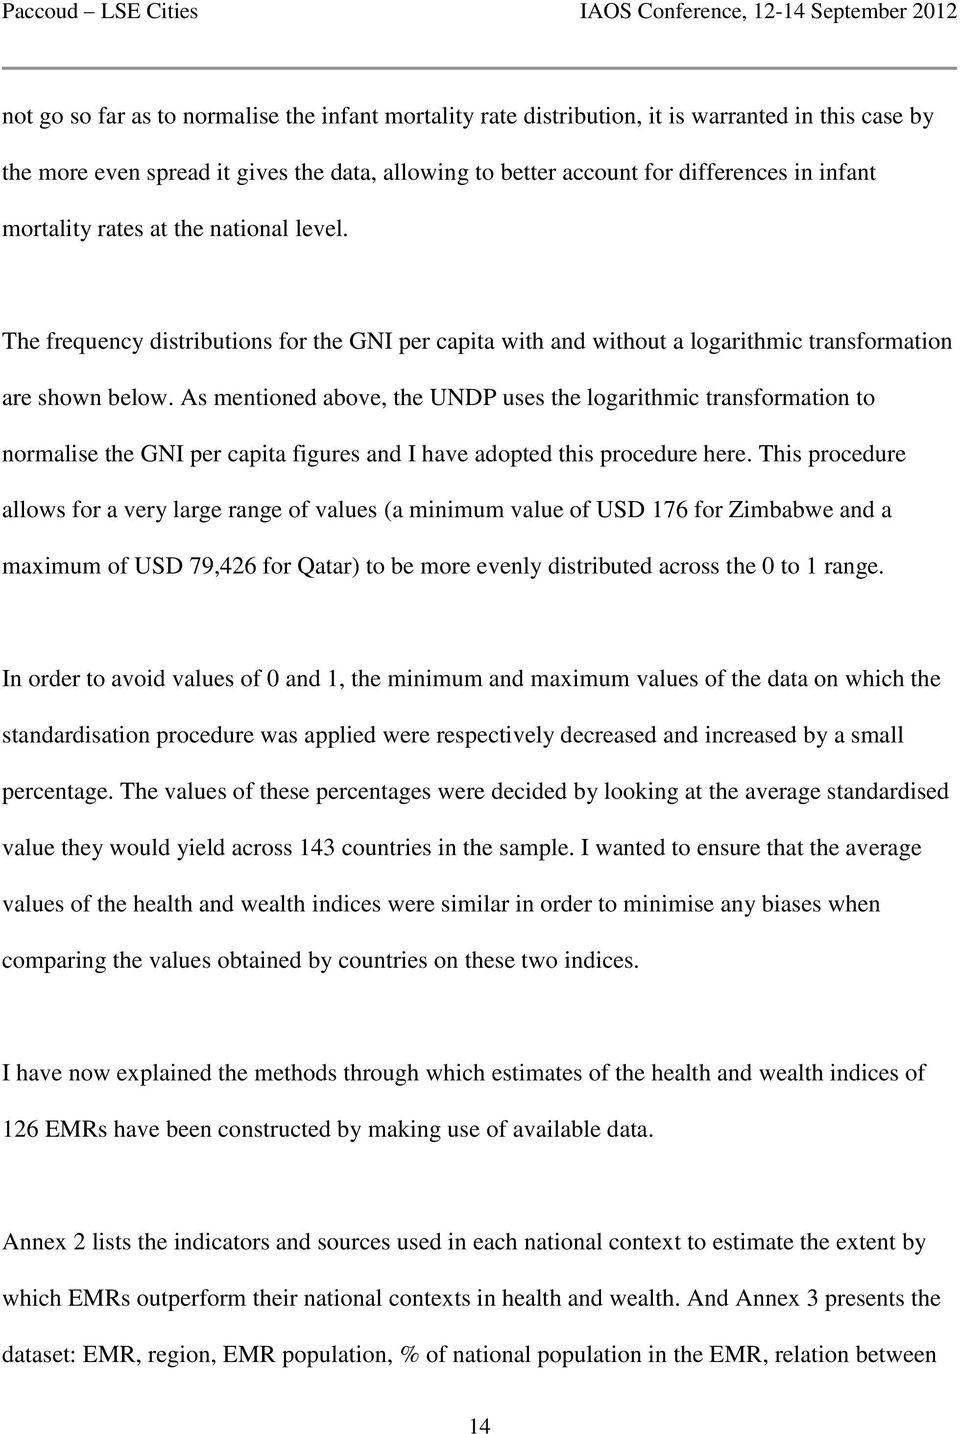 As mentioned above, the UNDP uses the logarithmic transformation to normalise the GNI per capita figures and I have adopted this procedure here.